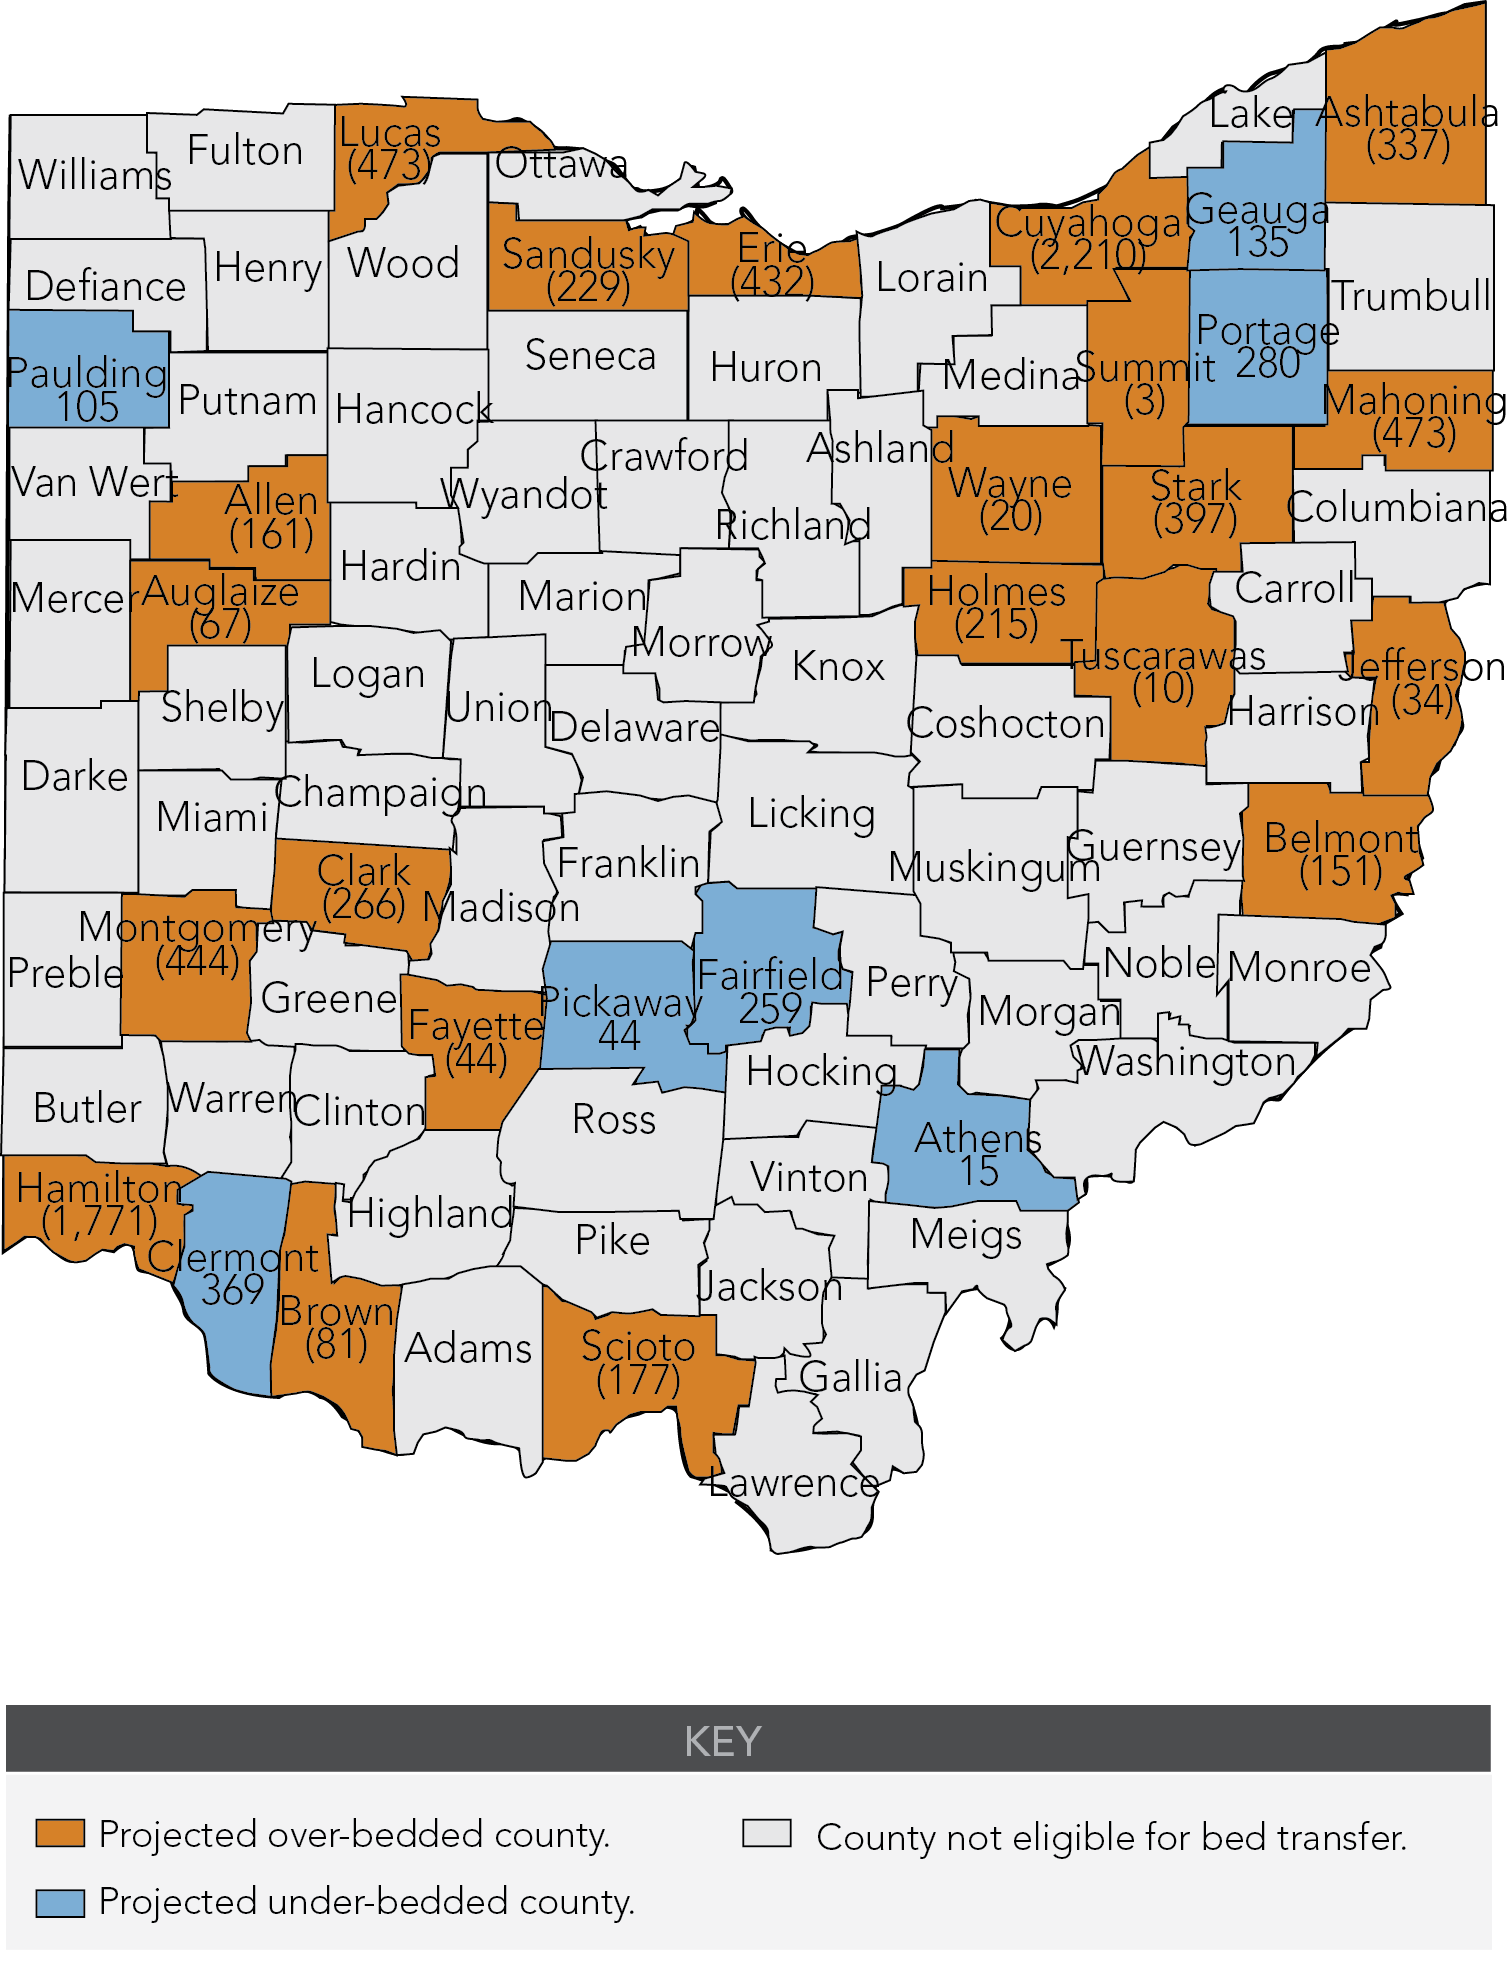 Final Ohio nursing home bed need vs. excess results map for 2016